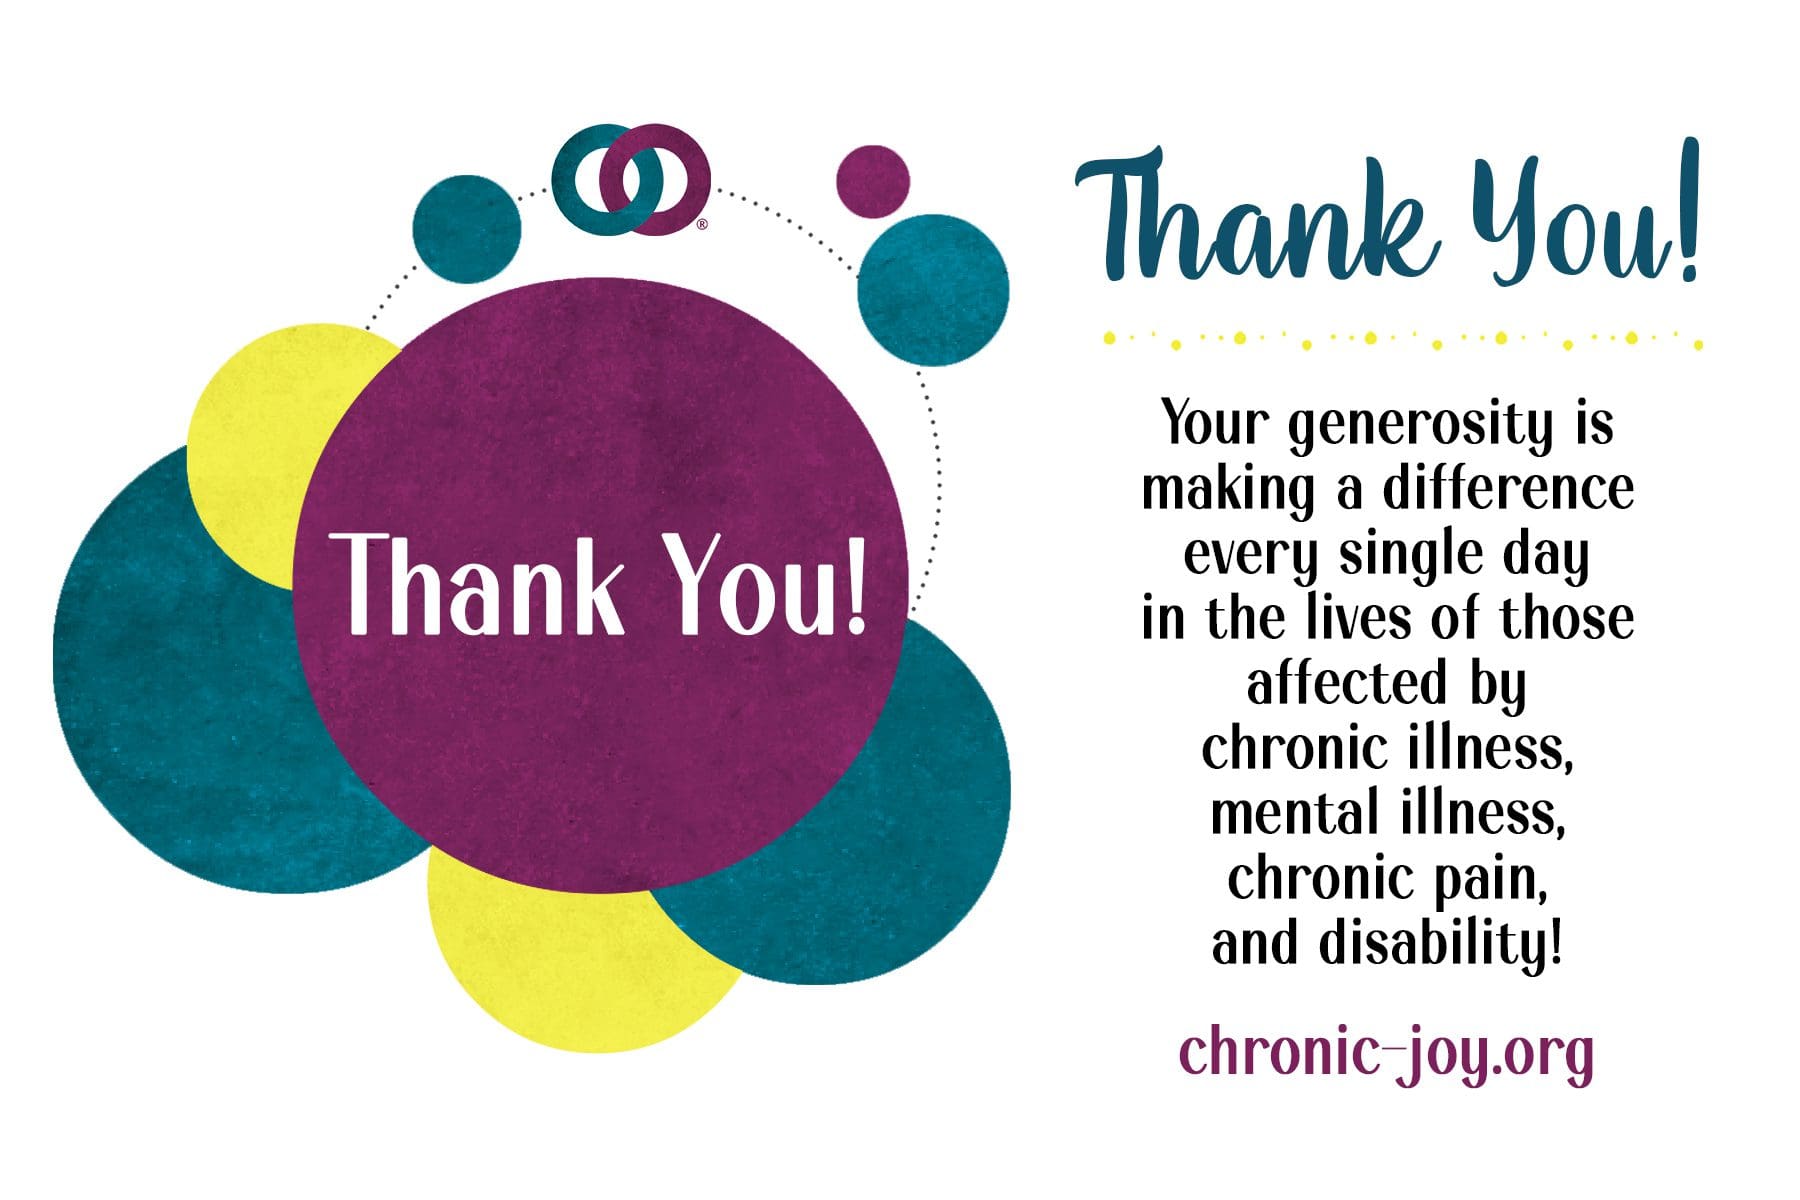 "Thank You! Your generosity is making a difference in the lives of those affected by chronic illness, mental illness, chronic pain, and disability every, single day."